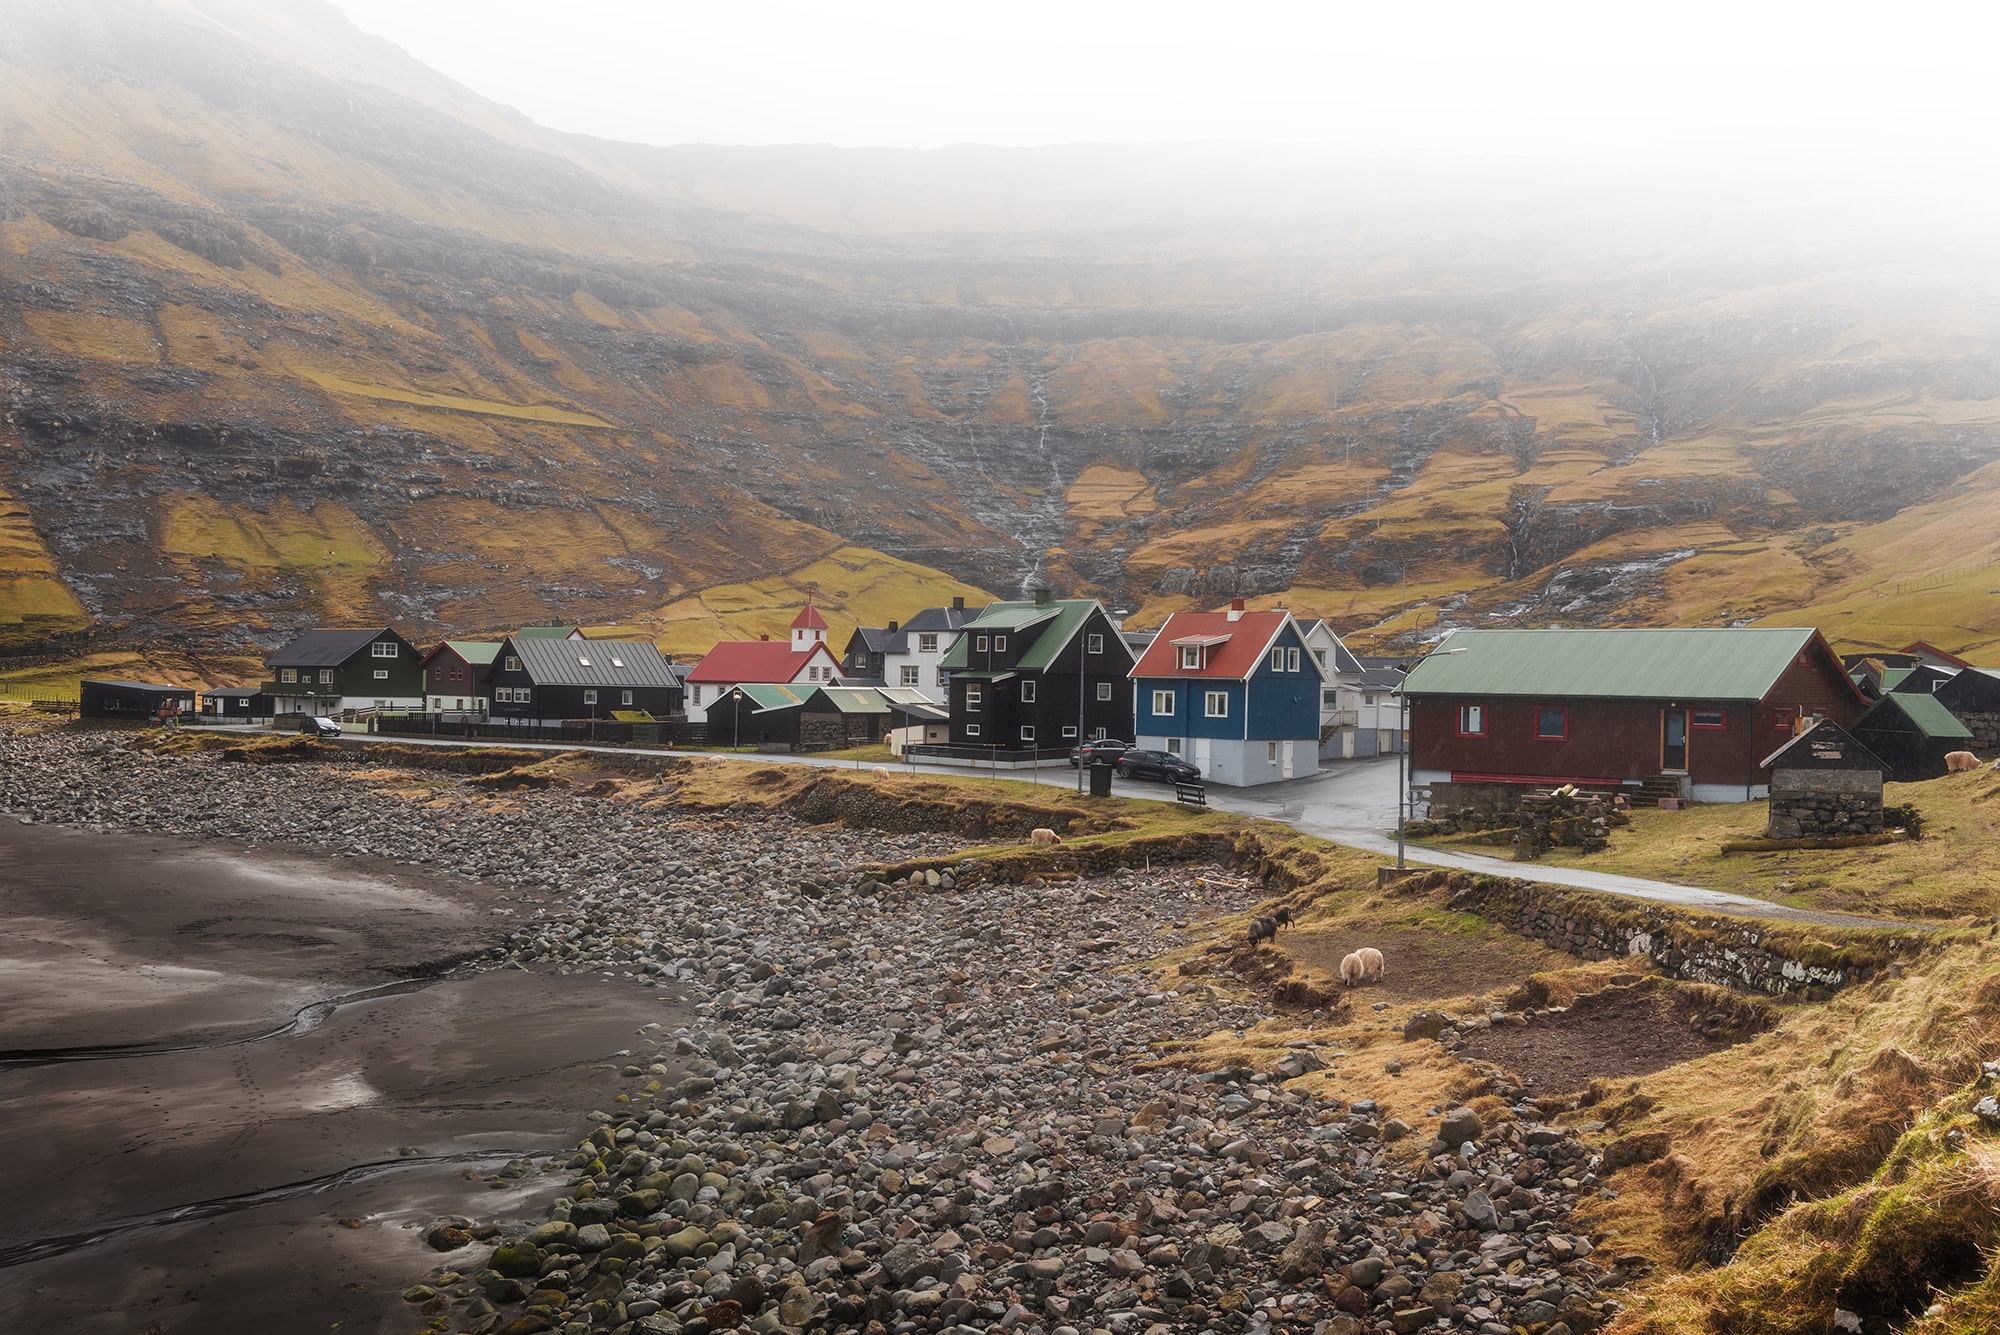 Experience the enchanting allure of landscape photography with this captivating image capturing the village of Tjørnuvík immersed in a moody atmosphere in the Faroe Islands. Delve into the mystical ambiance as the rugged terrain and quaint houses evoke a sense of timeless charm against the backdrop of dramatic skies. Let yourself be transported to this remote coastal village, where every corner holds a story waiting to be discovered.